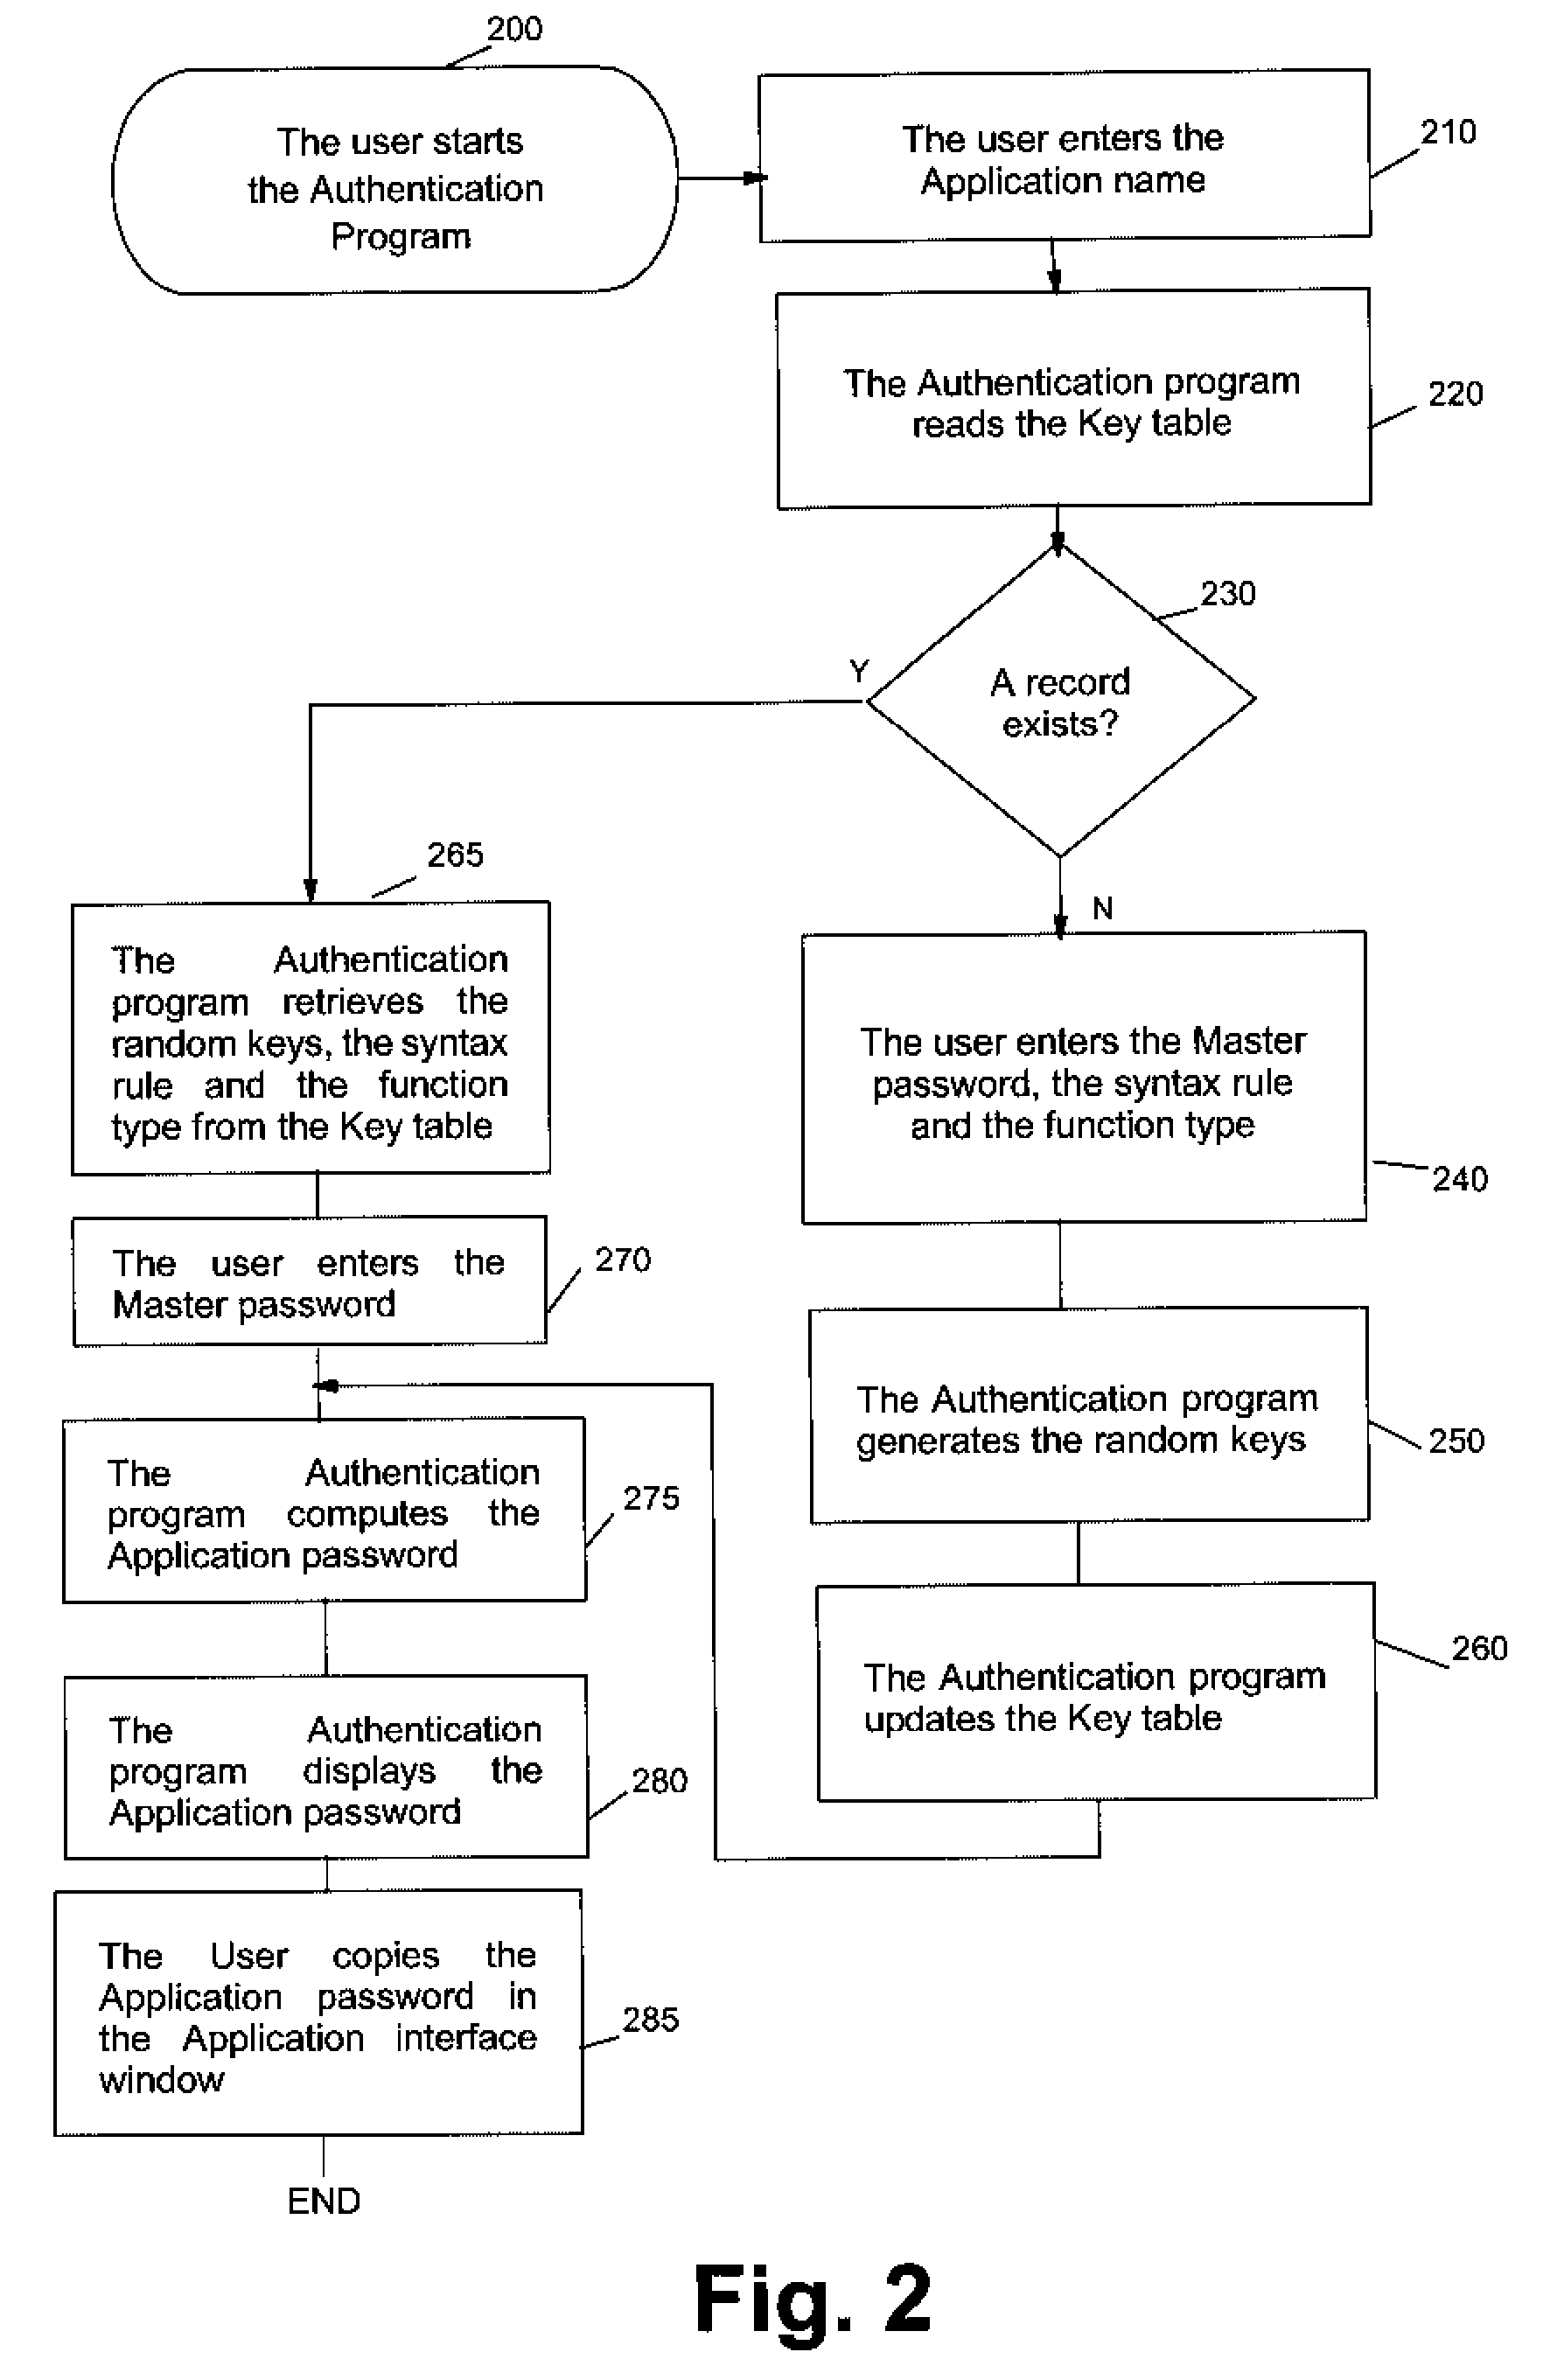 Client-based method, system and program to manage multiple authentication